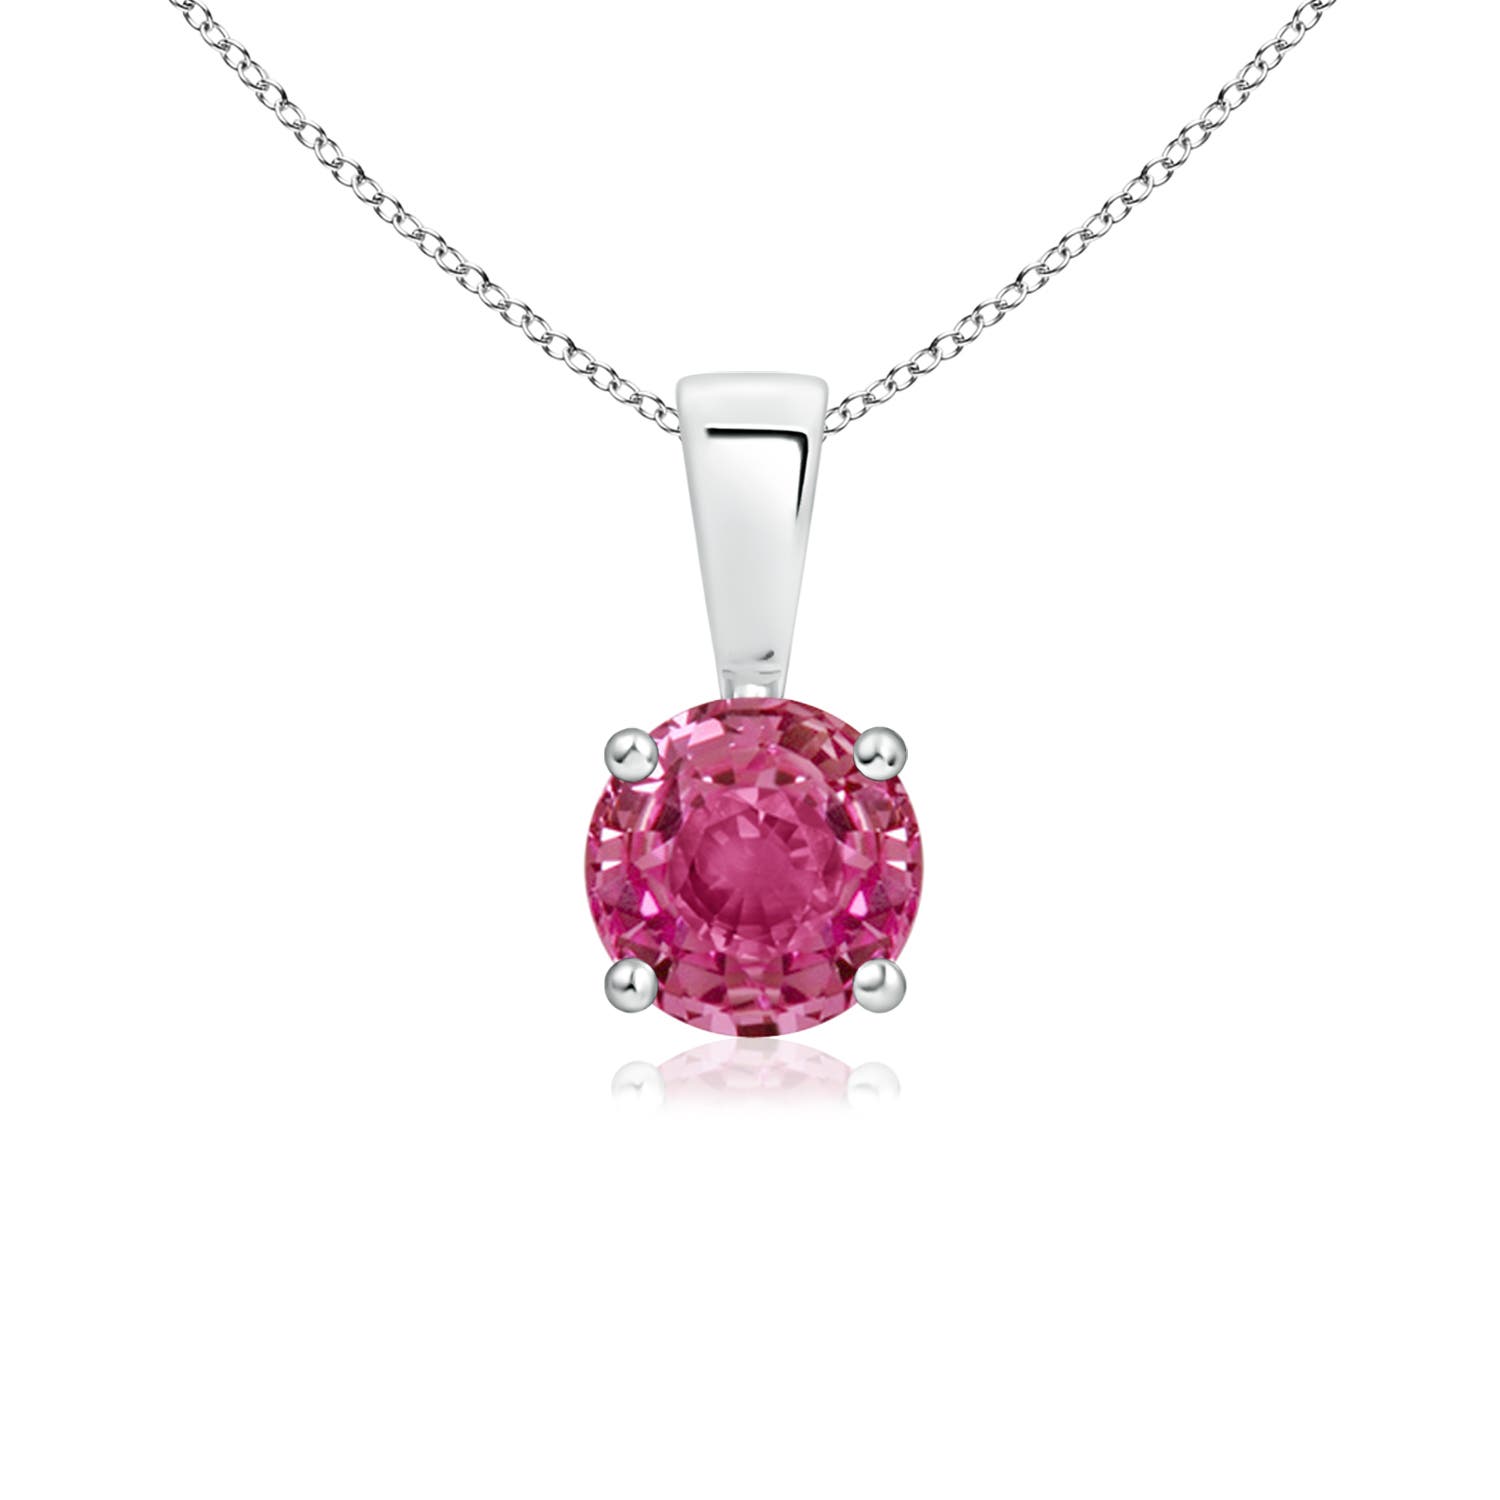 Buy Pink Sapphire Pendant & Necklace Online in India 